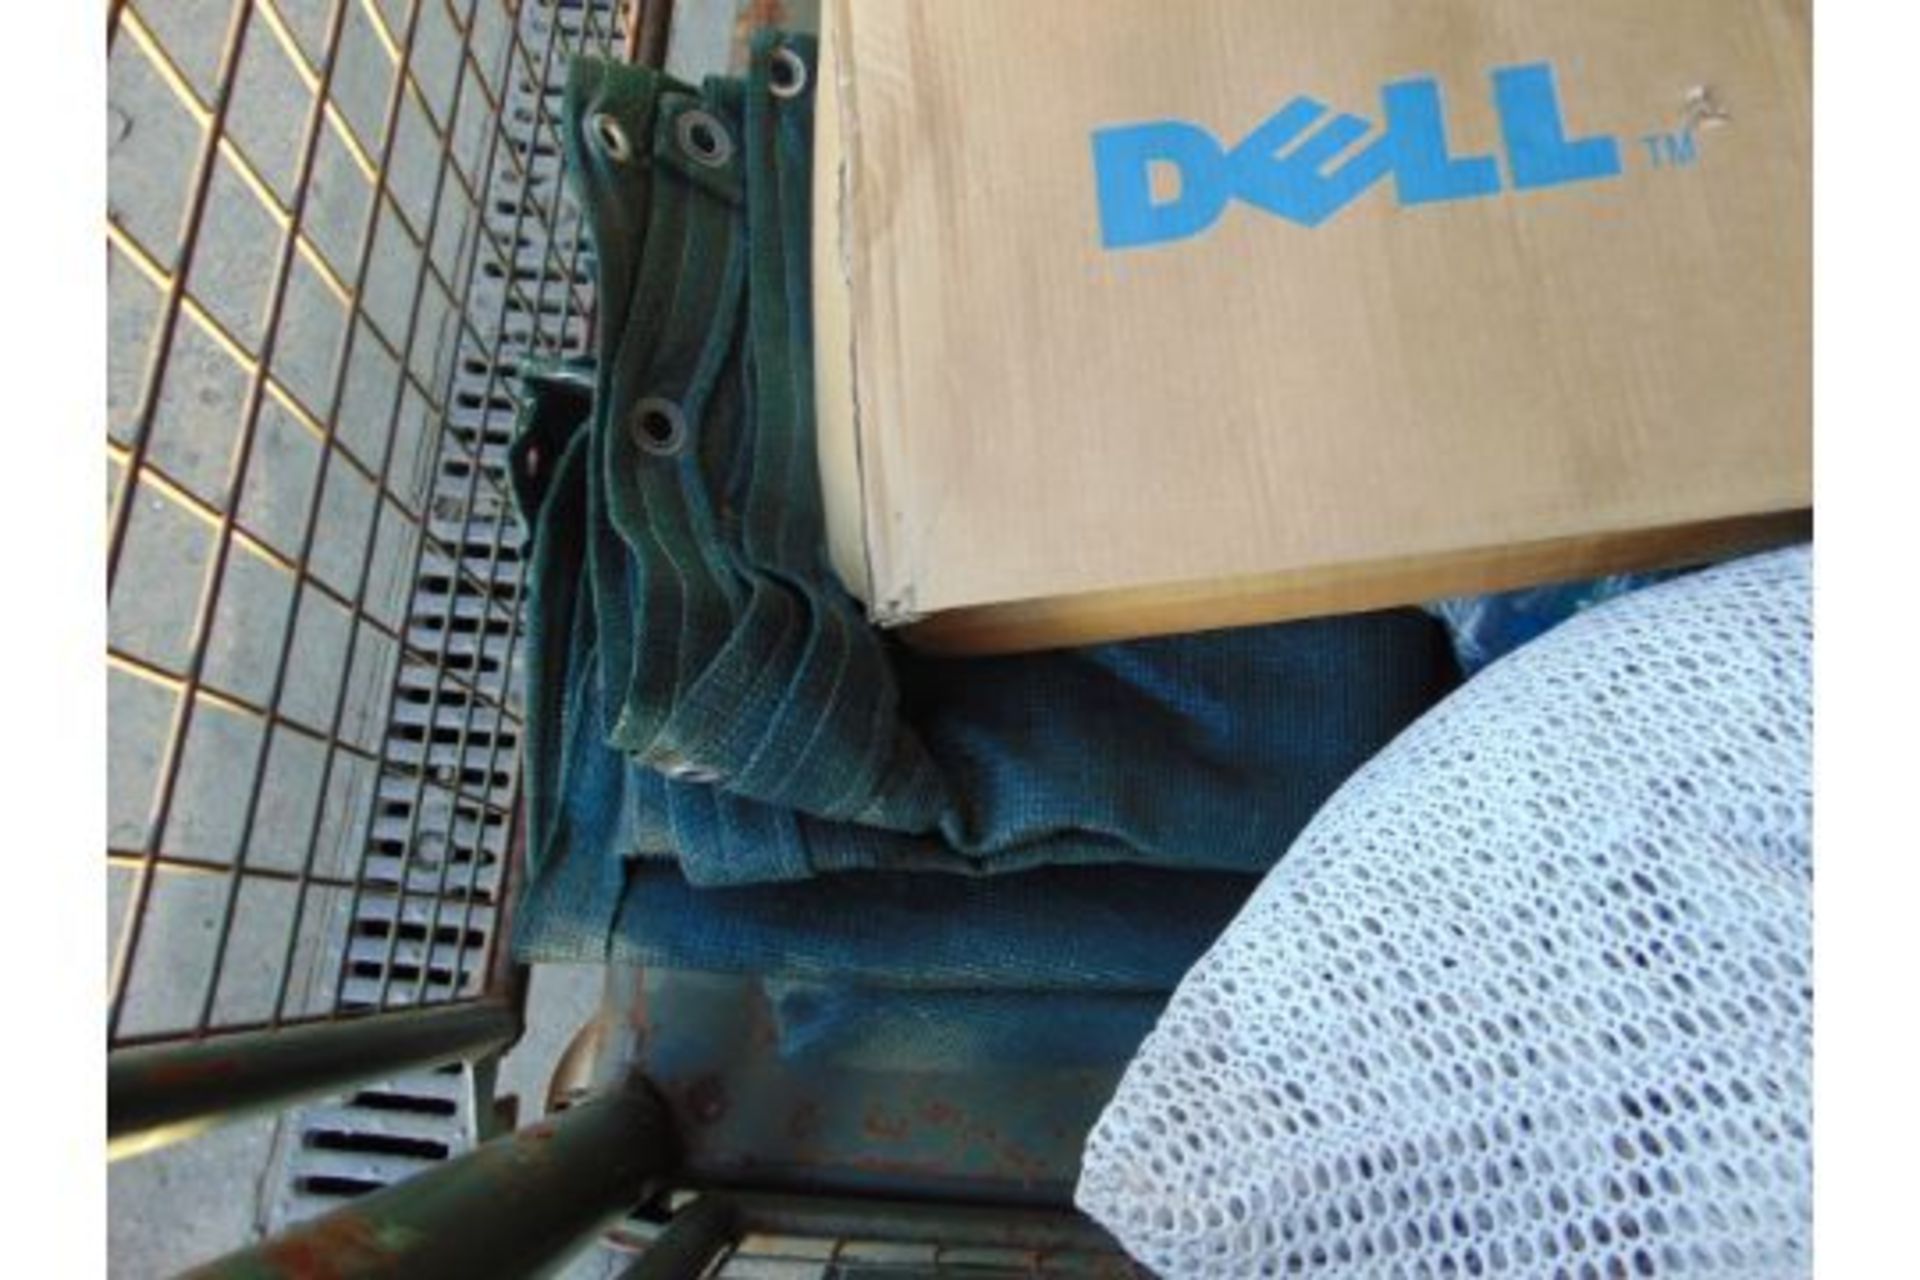 1 x Stillage New Unused DELL Laptop Bags, Canvas Sheets, Carry on Bag etc - Image 5 of 6